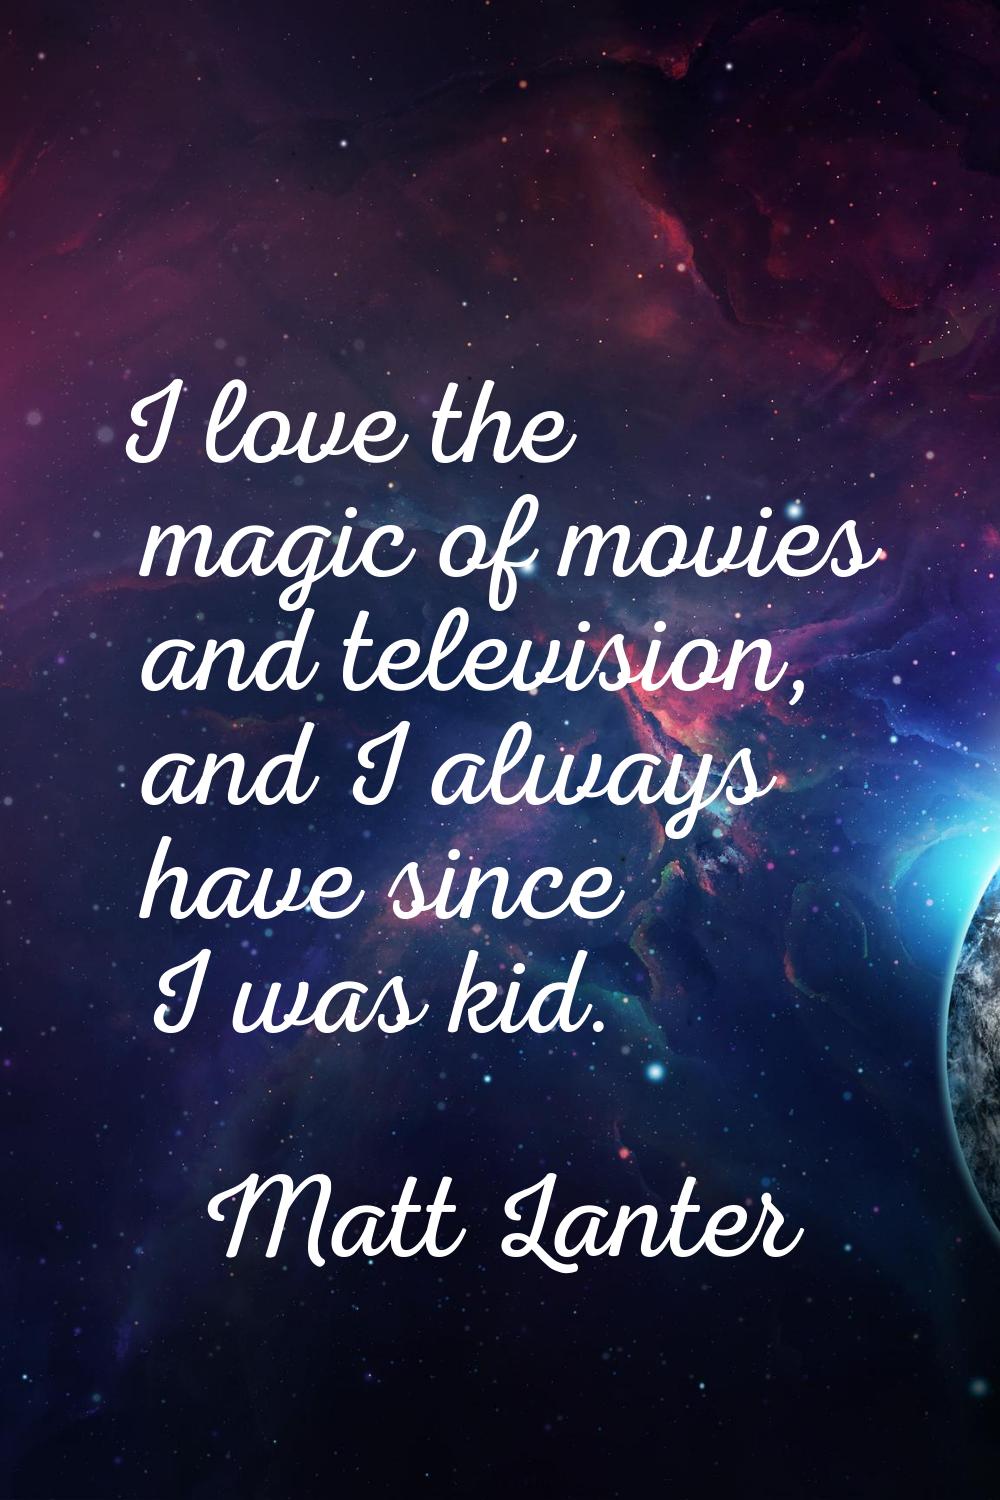 I love the magic of movies and television, and I always have since I was kid.